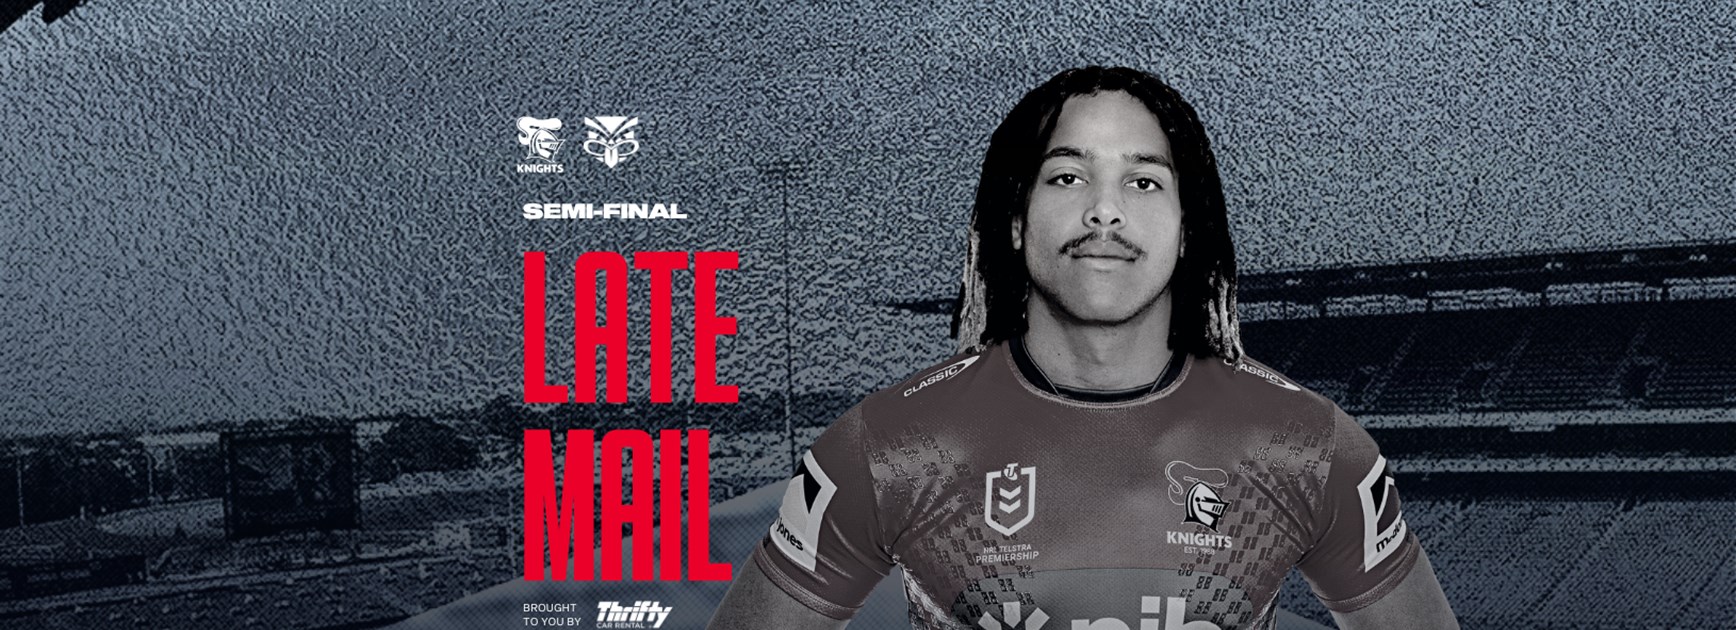 NRL Late Mail: Warriors v Knights